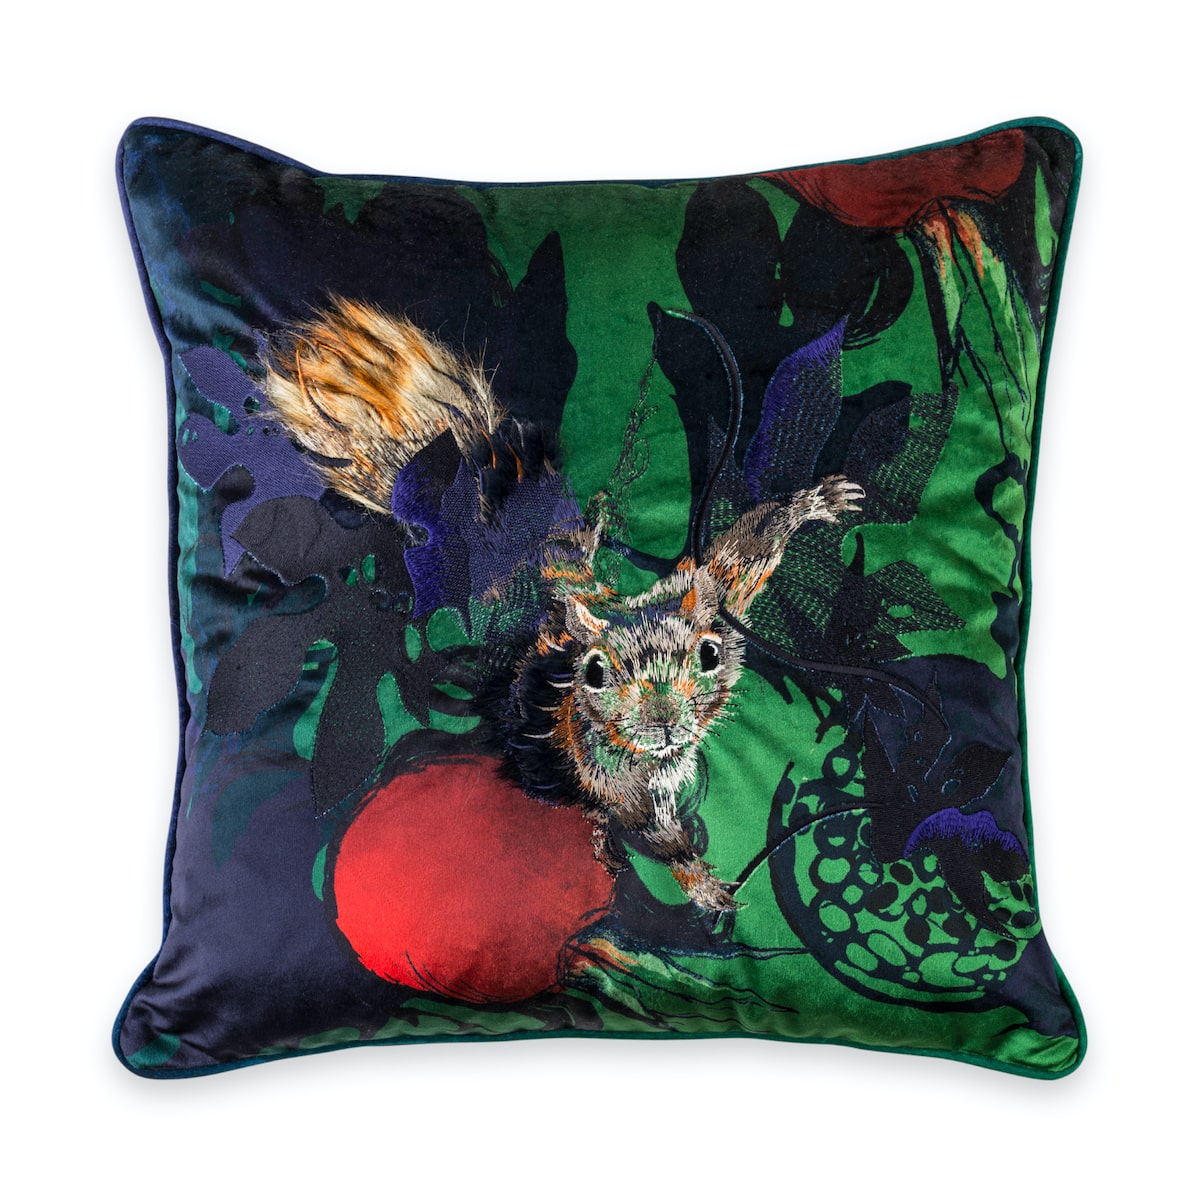 Red Squirrel Velvet Square Cushion by Jacky Puzey for AUTHOR's collection of British made luxury home accessories